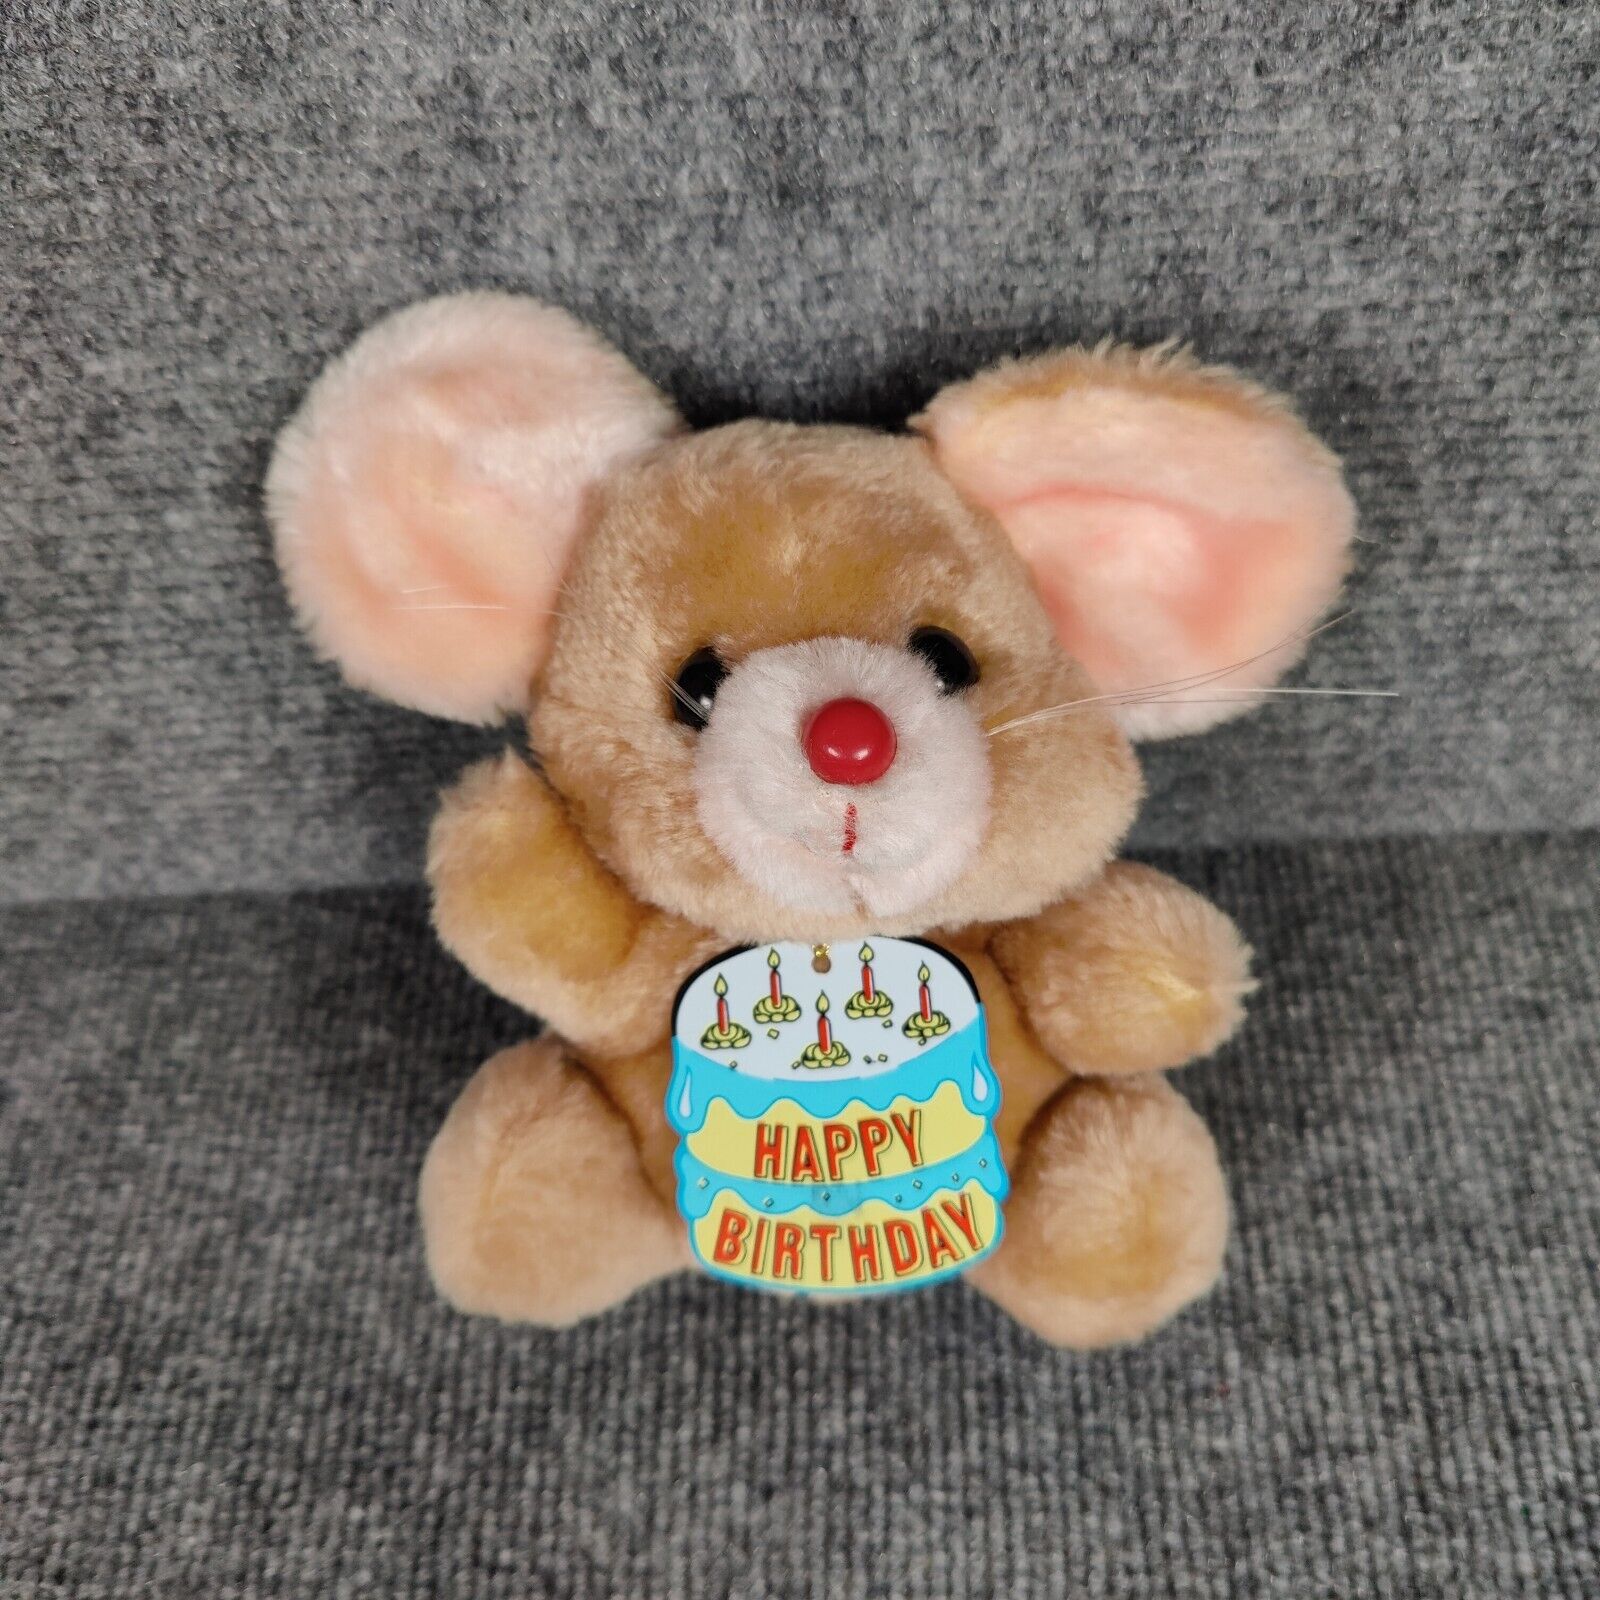 Happy Birthday Plush Mouse Russ Vintage Doll Stuffed Animal Toy Cake Candles 6\